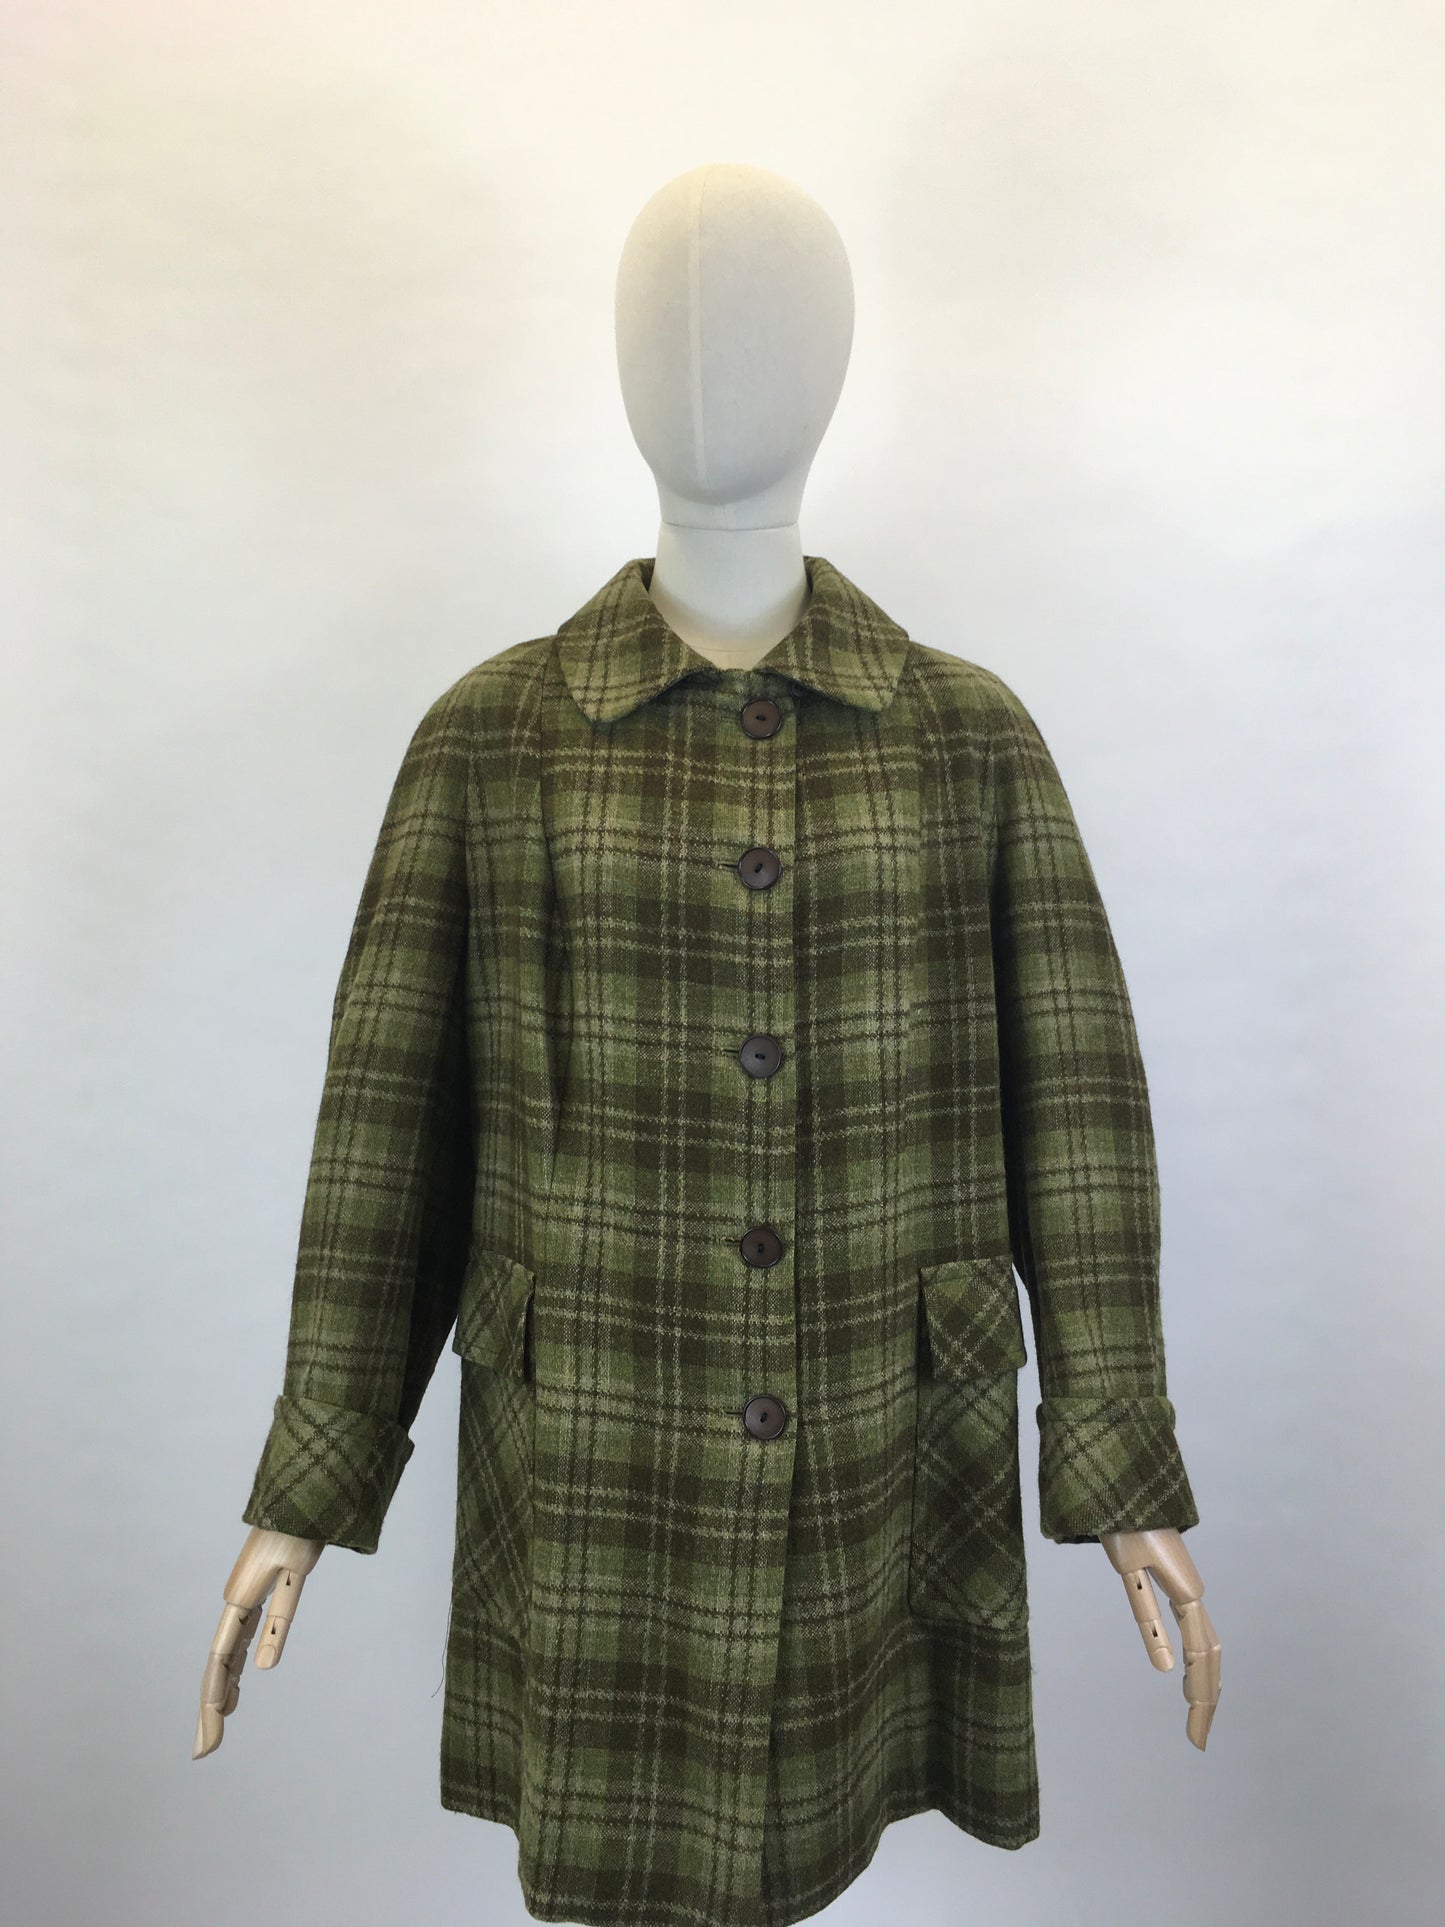 Original 1950’s FABULOUS Green Check Jacket/ Coat  - Classic 50’s Styling & Great Pockets